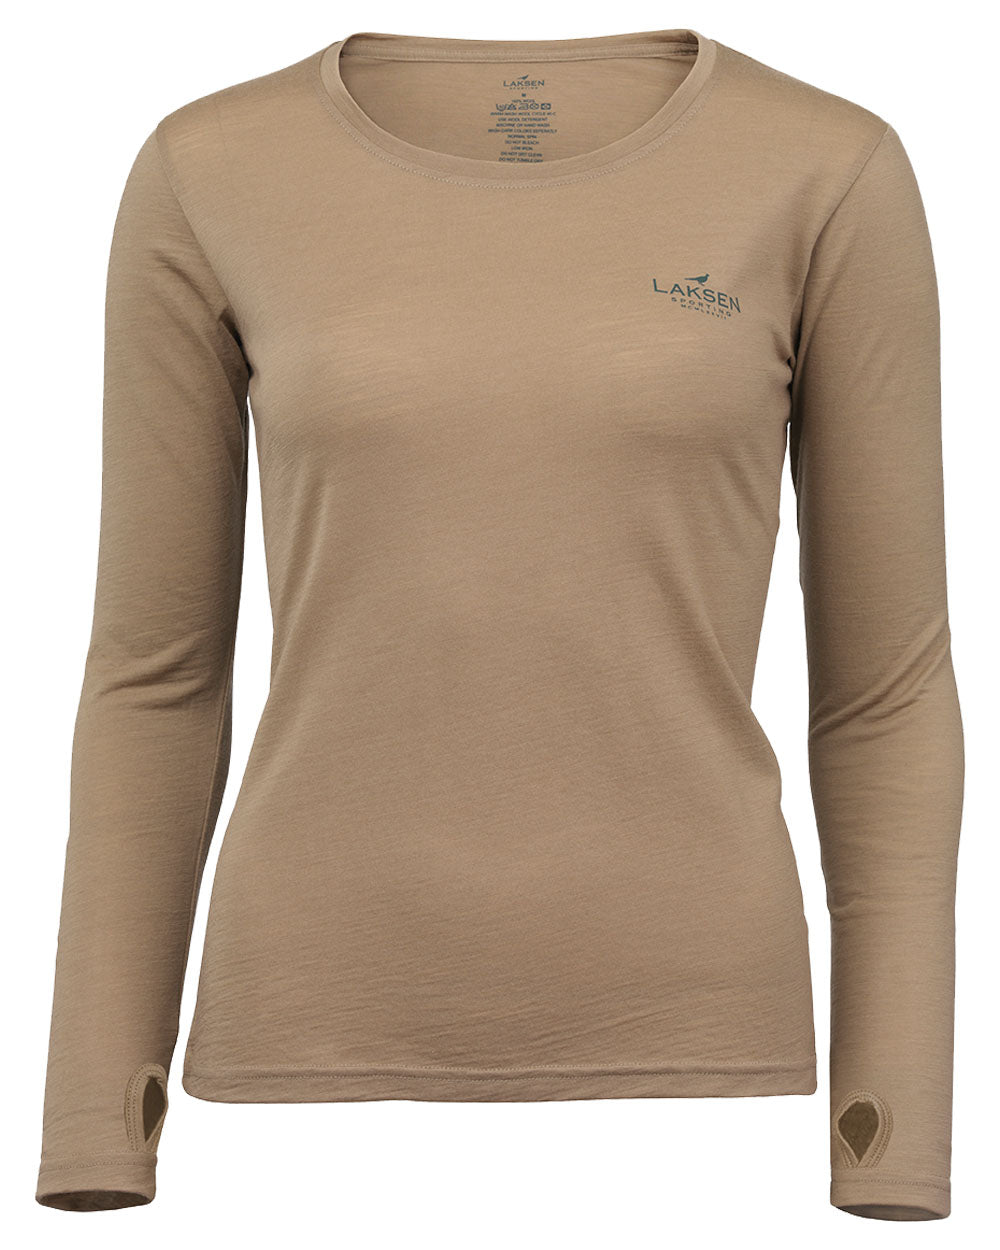 Sand coloured Laksen Shiell Ladies Long Sleeve T-Shirt on White background 